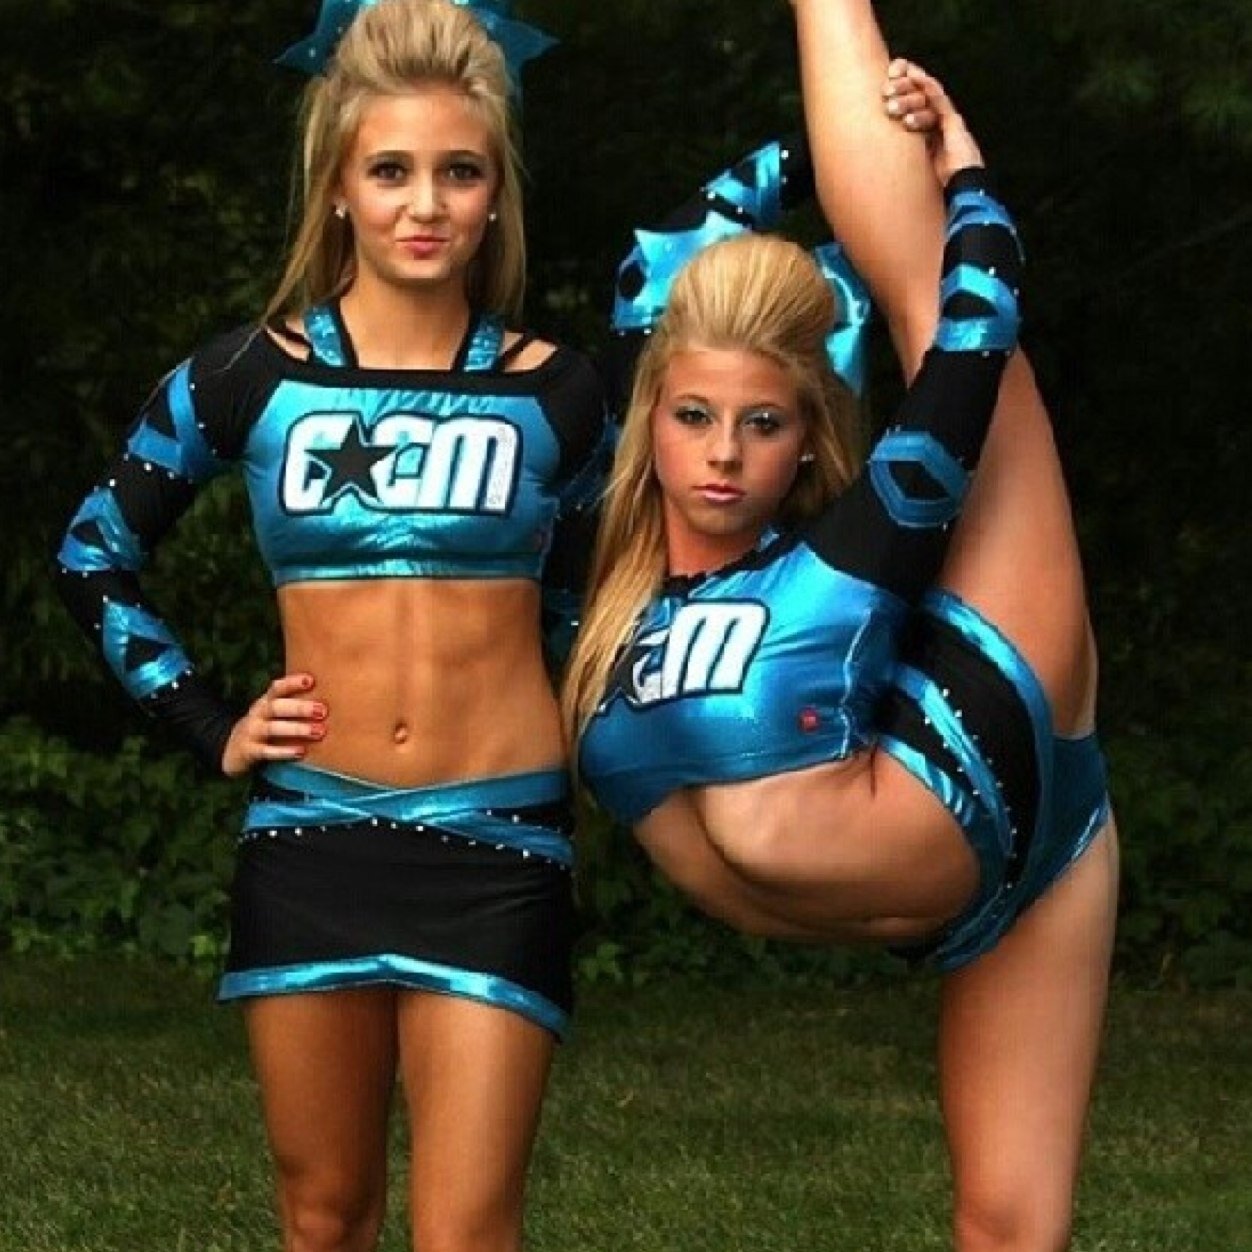 @cheerswaggy 